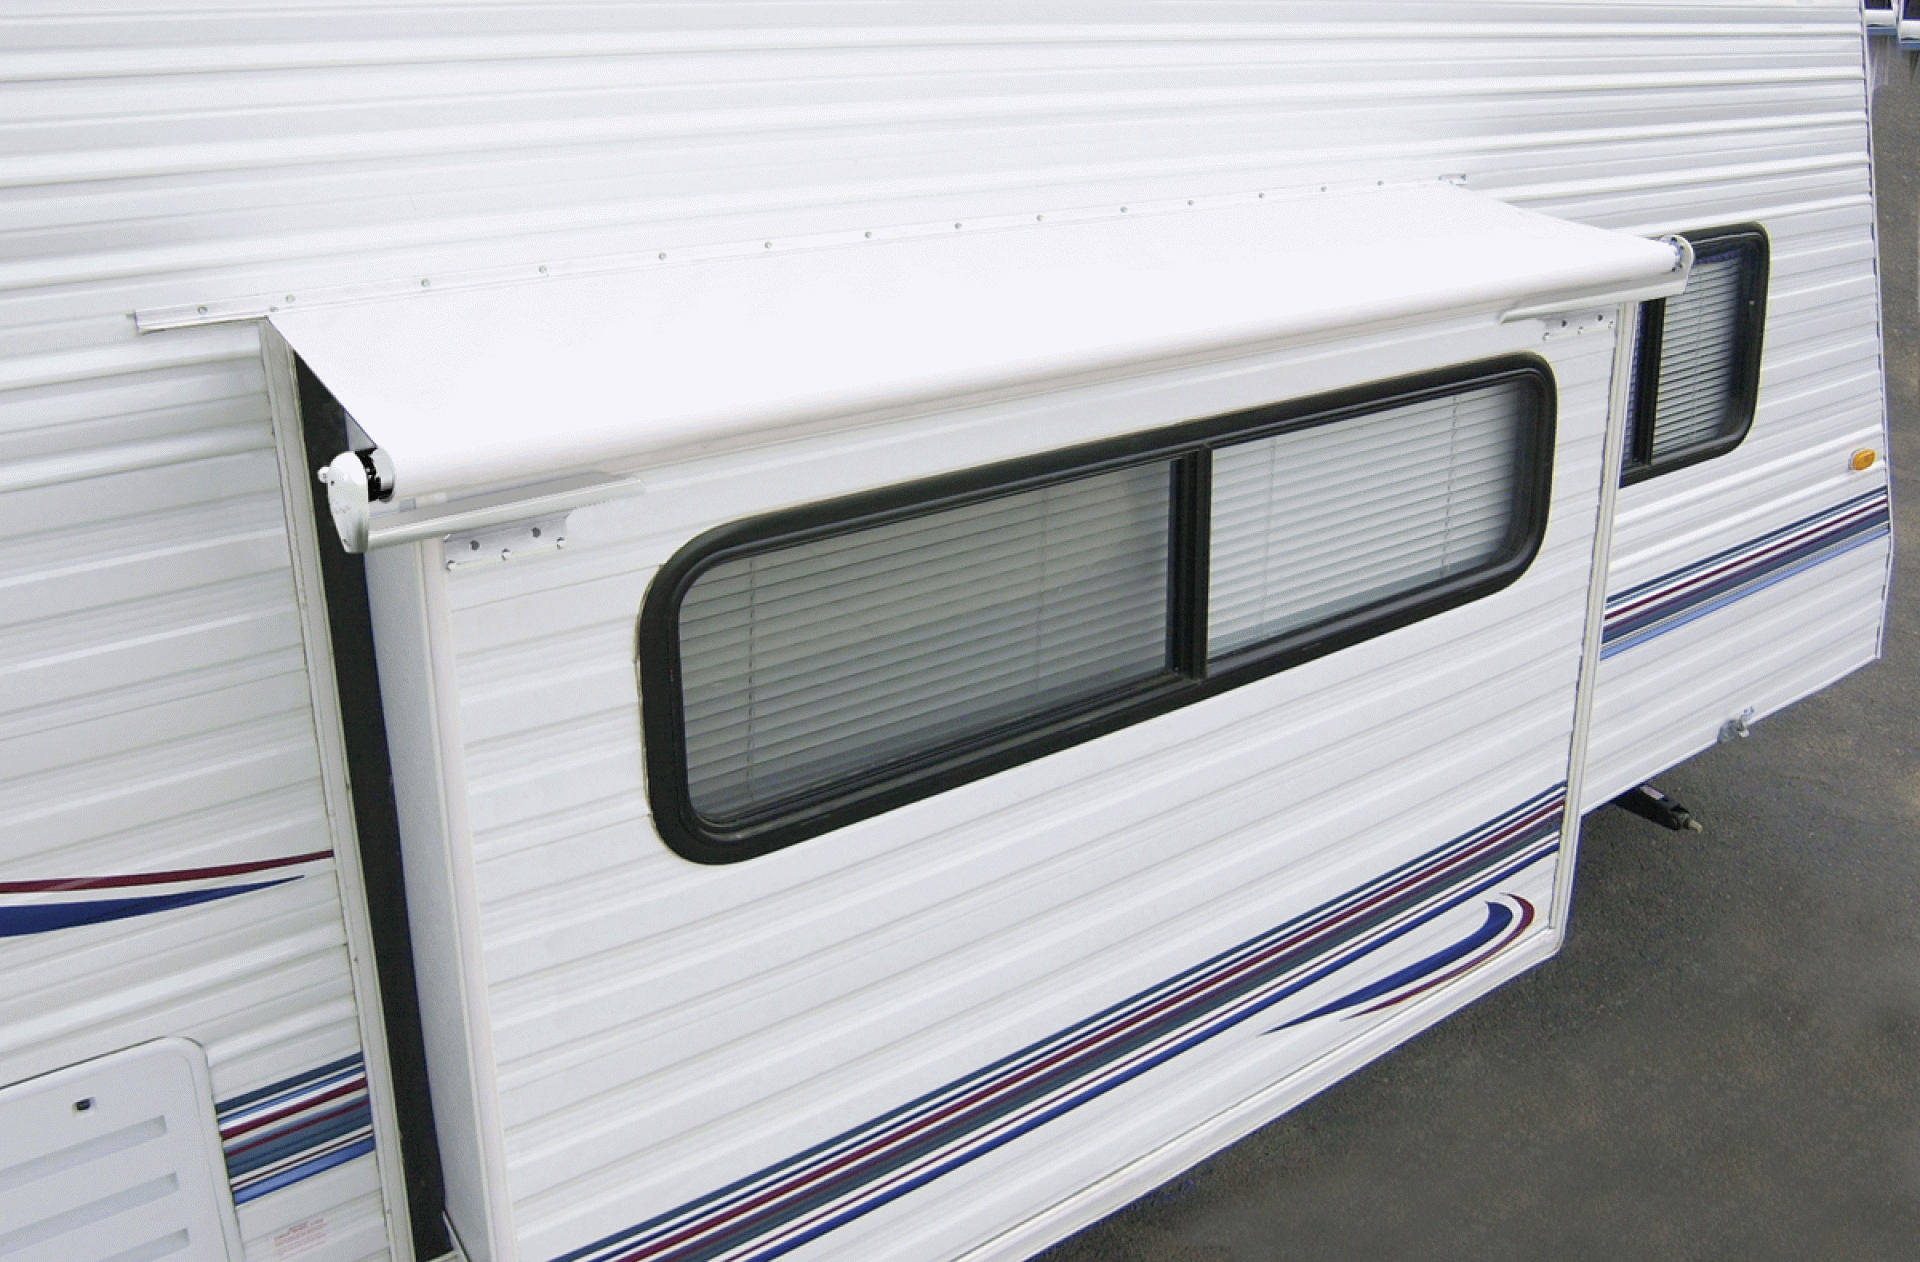 CAREFREE OF COLORADO | LH0810042 | SLIDEOUT COVER AWNING 74" - 81.9" ROOF RANGE WHITE VINYL